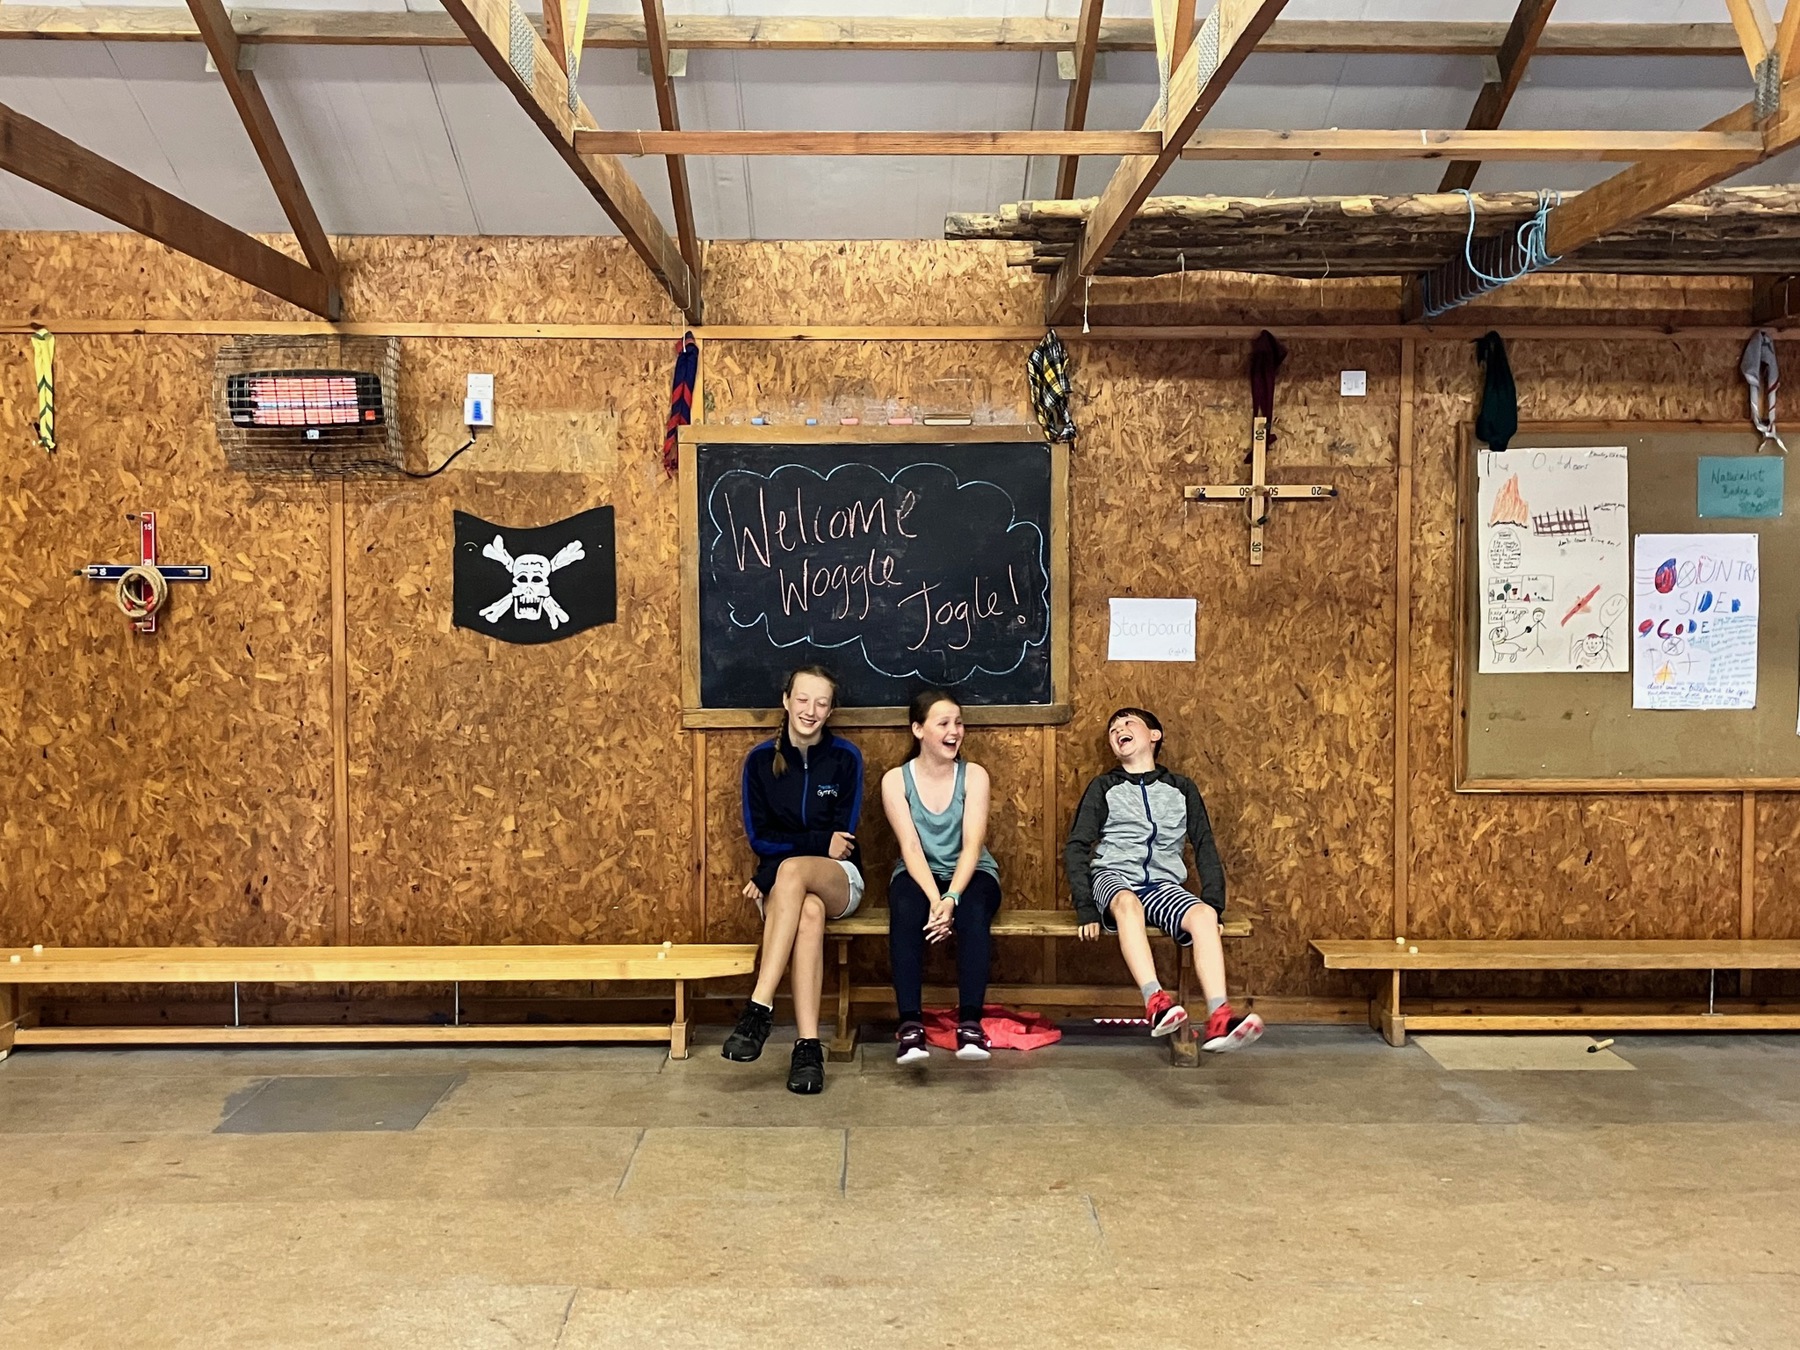 The image shows Bethan, Hattie and Ollie sat on a bench inside a wooden hut. On the blackboard behind their heads, 'Welcome Woggle JOGLE' is written. They're all laughing together. 